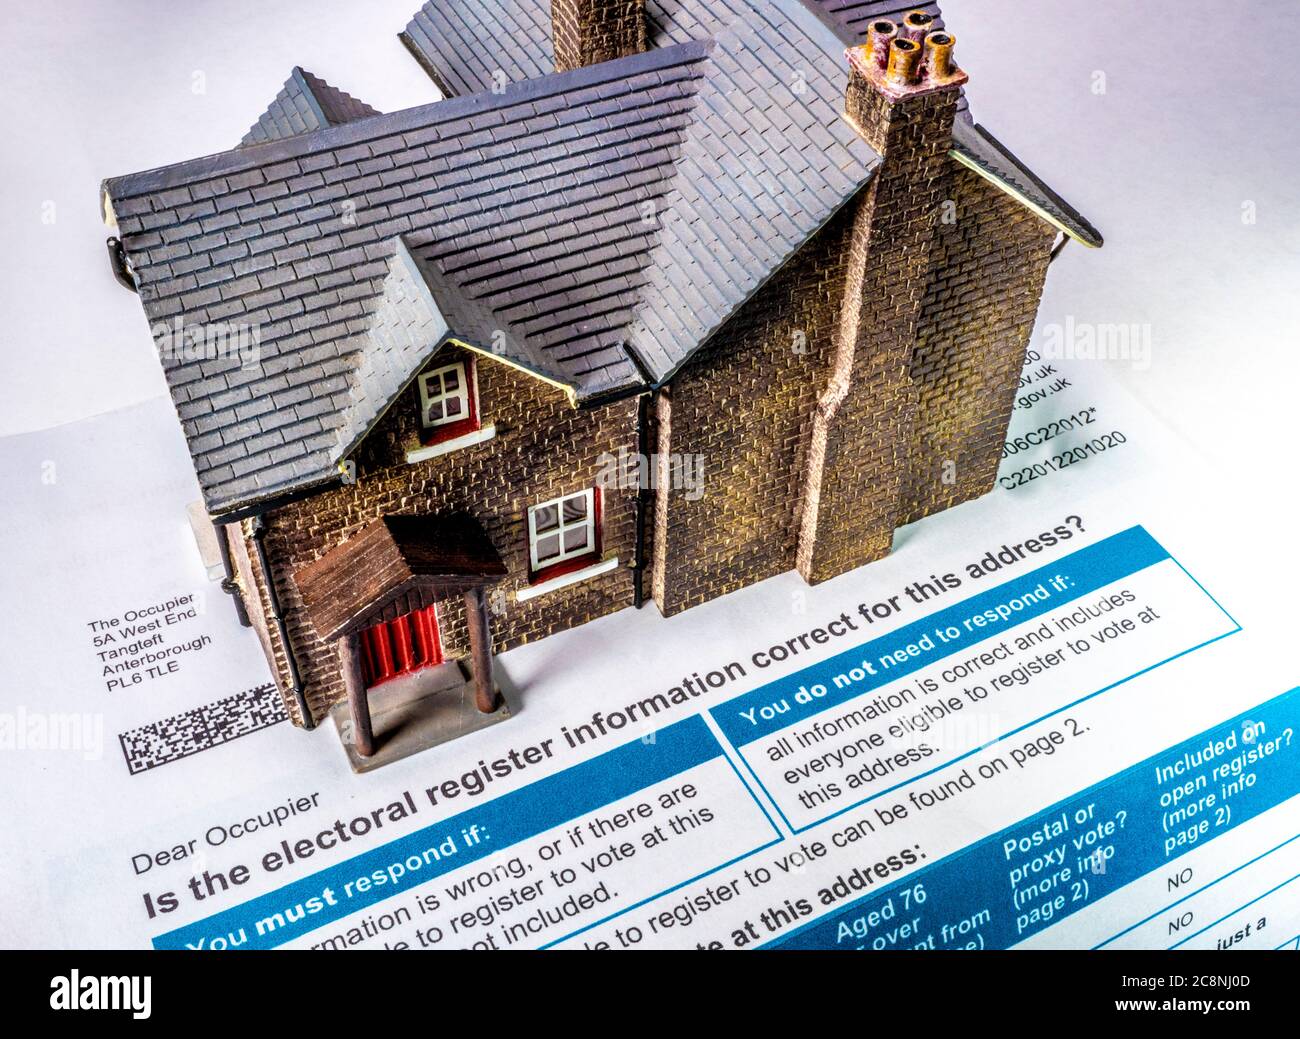 Model house on a council form, sent to the occupier of a home to to check accuracy of occupants / residents for electoral registration purposes (UK). Stock Photo